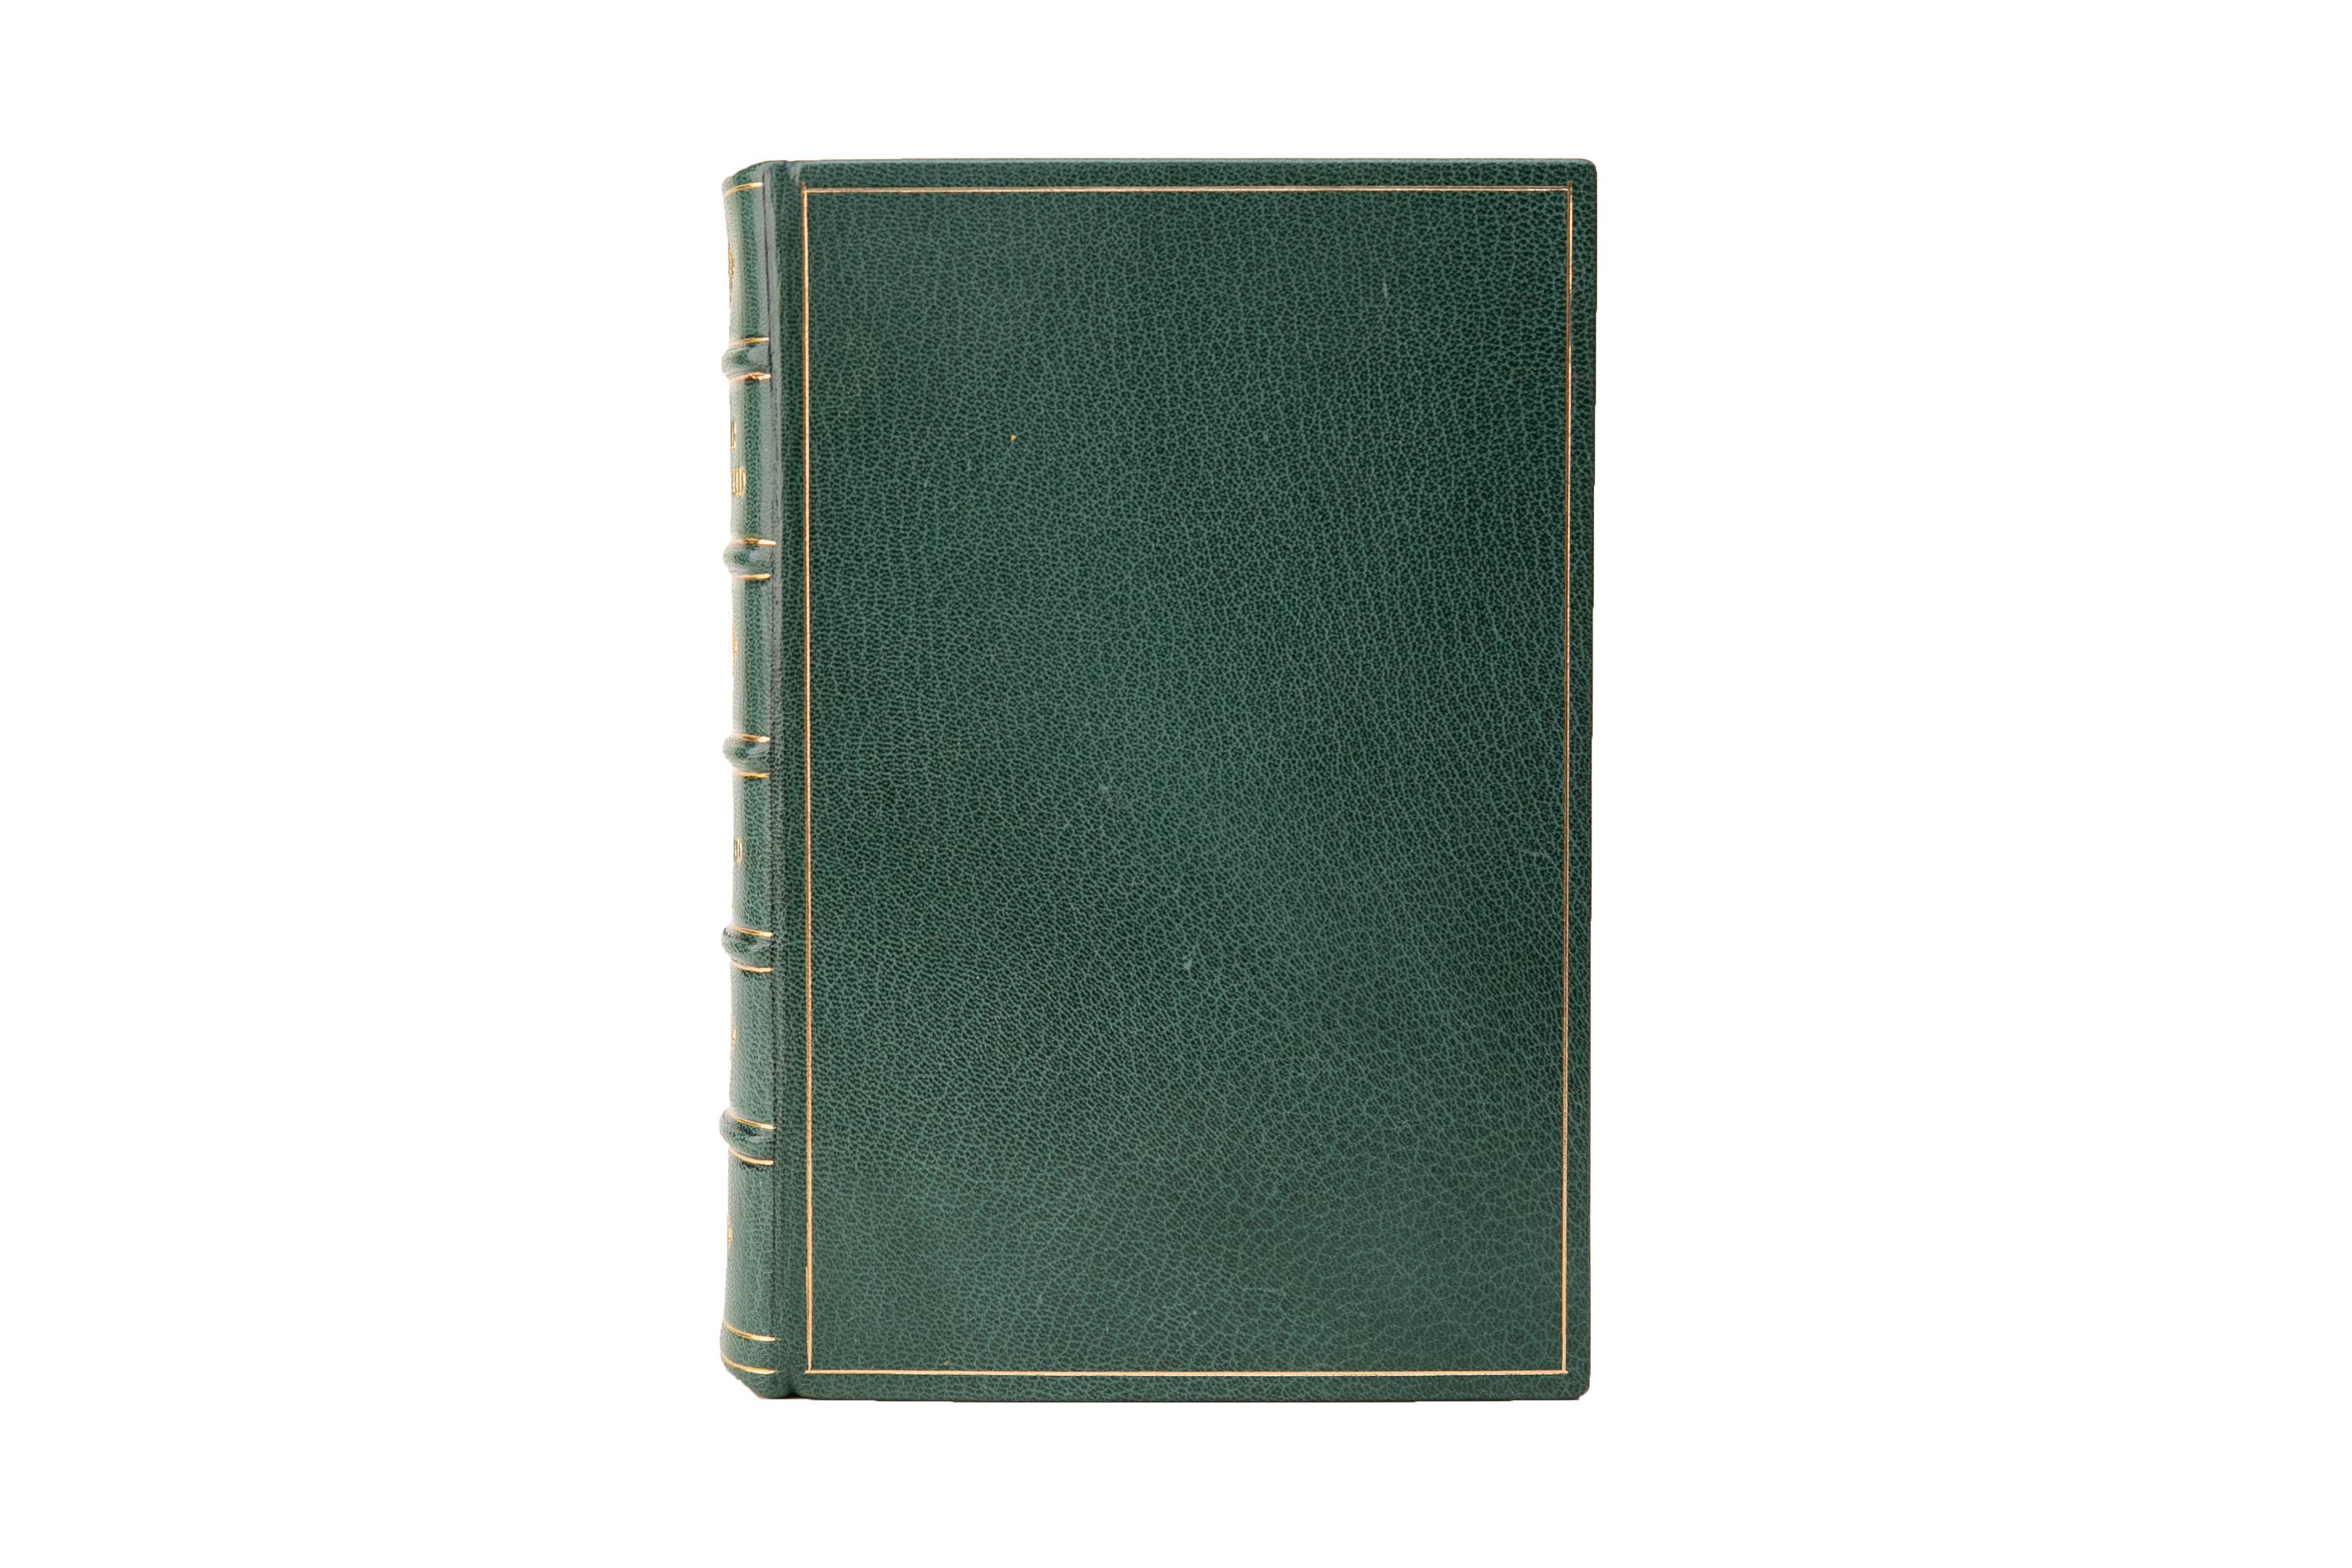 1 Volume. Ayn Rand, Atlas Shrugged. 1st Edition. Bound in full light green morocco with the covers and raised band spine displaying gilt-tooled detailing. All of the edges are gilt with marbled endpapers. New York: Random House, 1957.